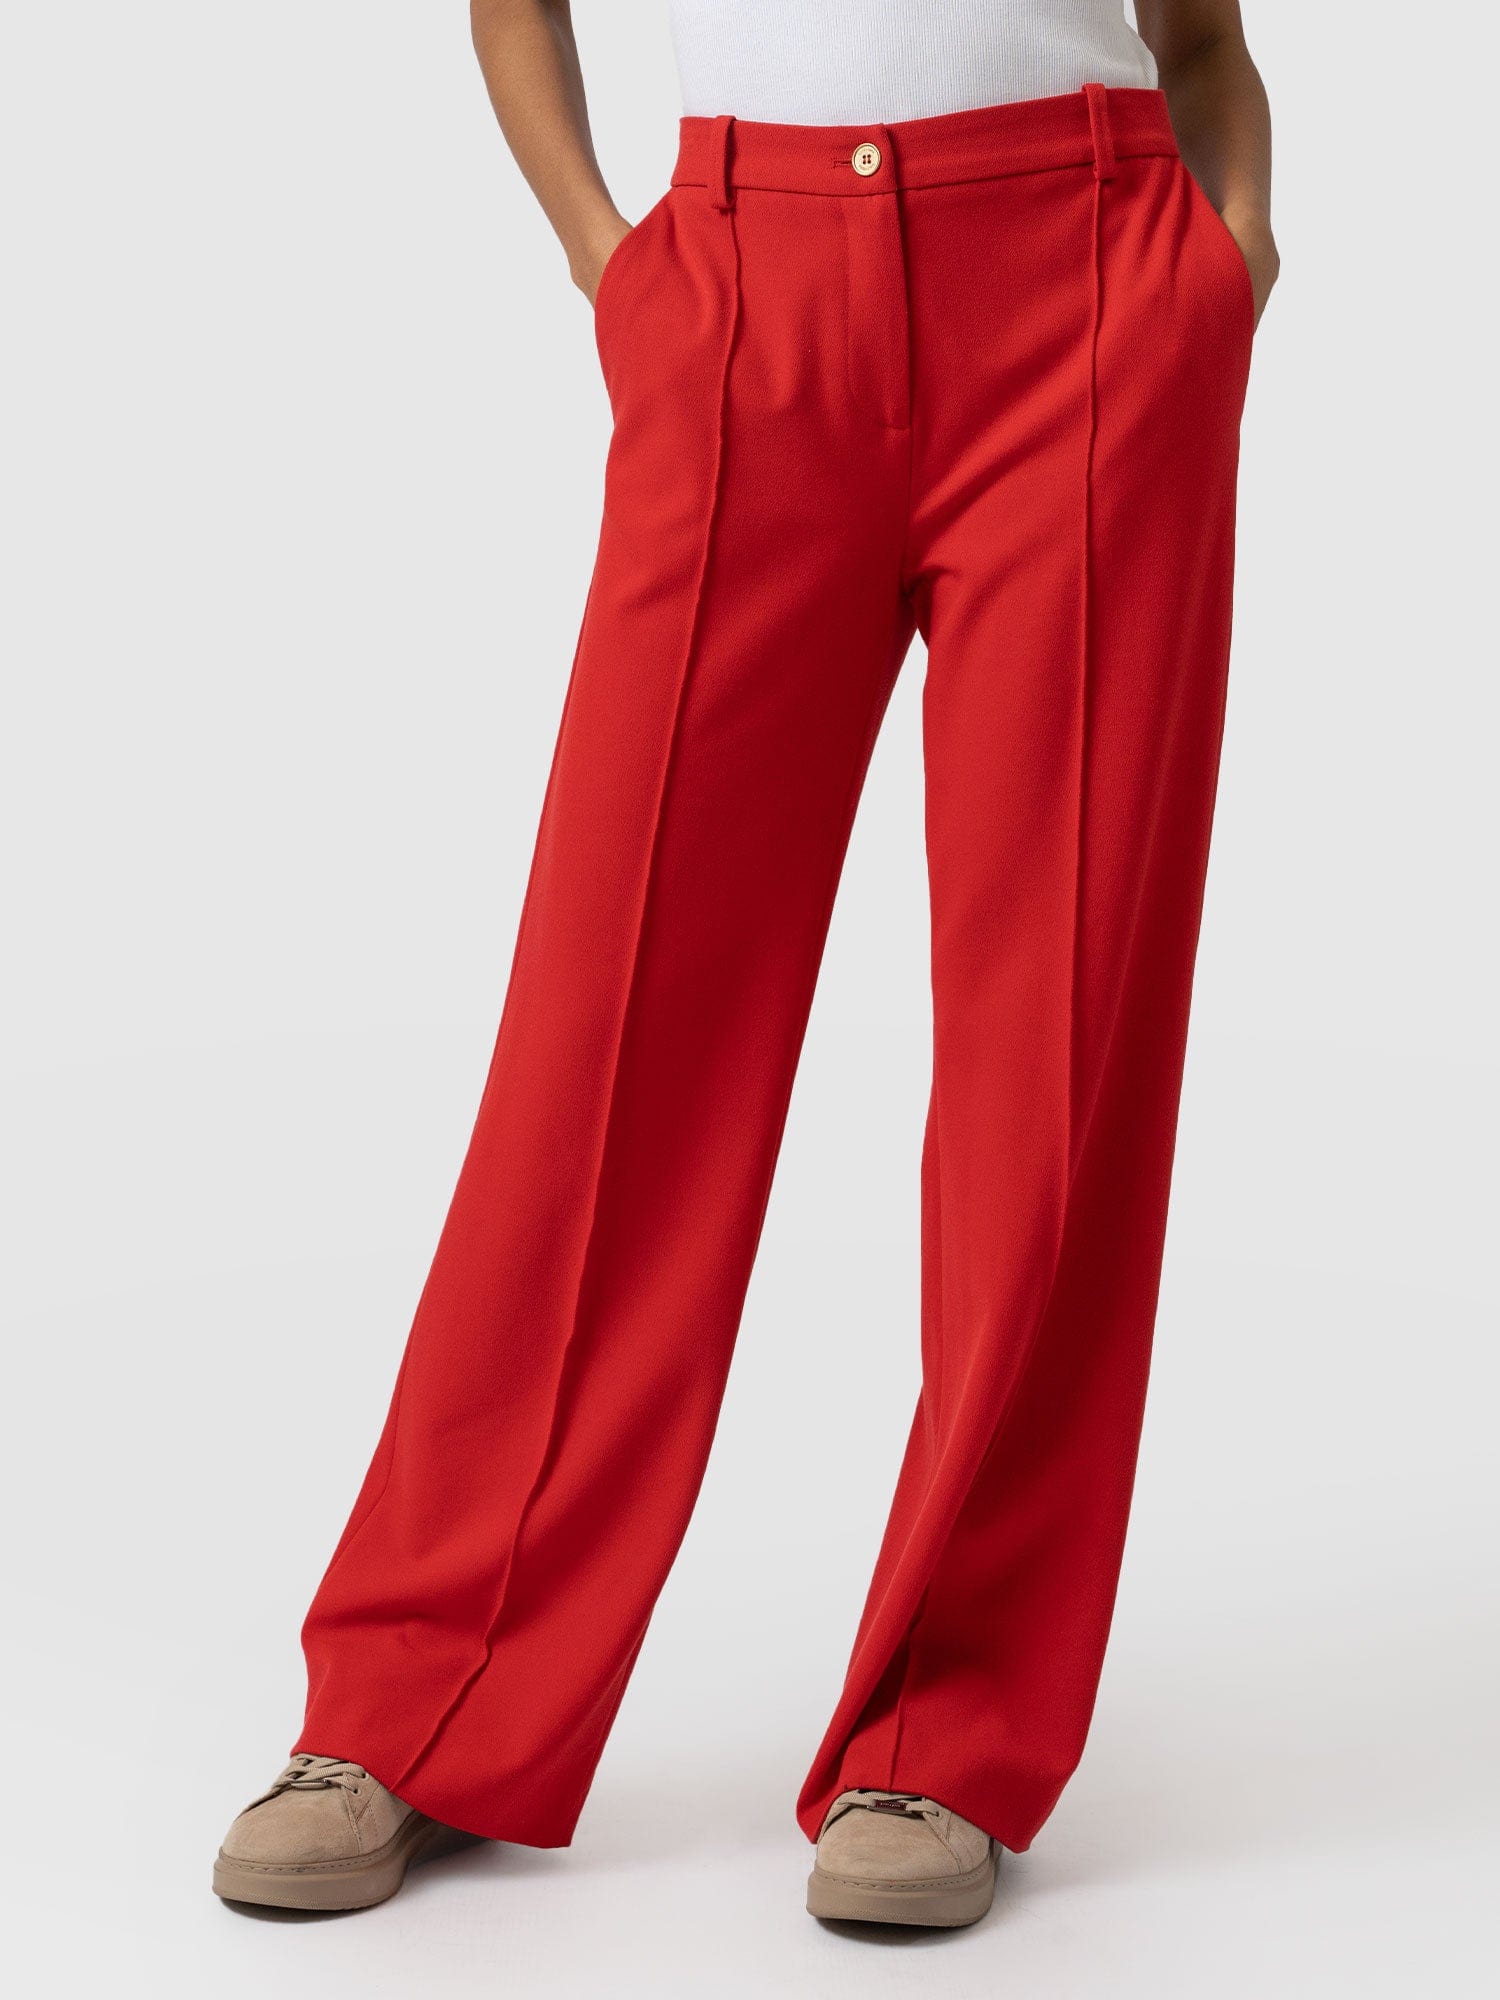 Flared tailored trousers - Red - Ladies | H&M IN